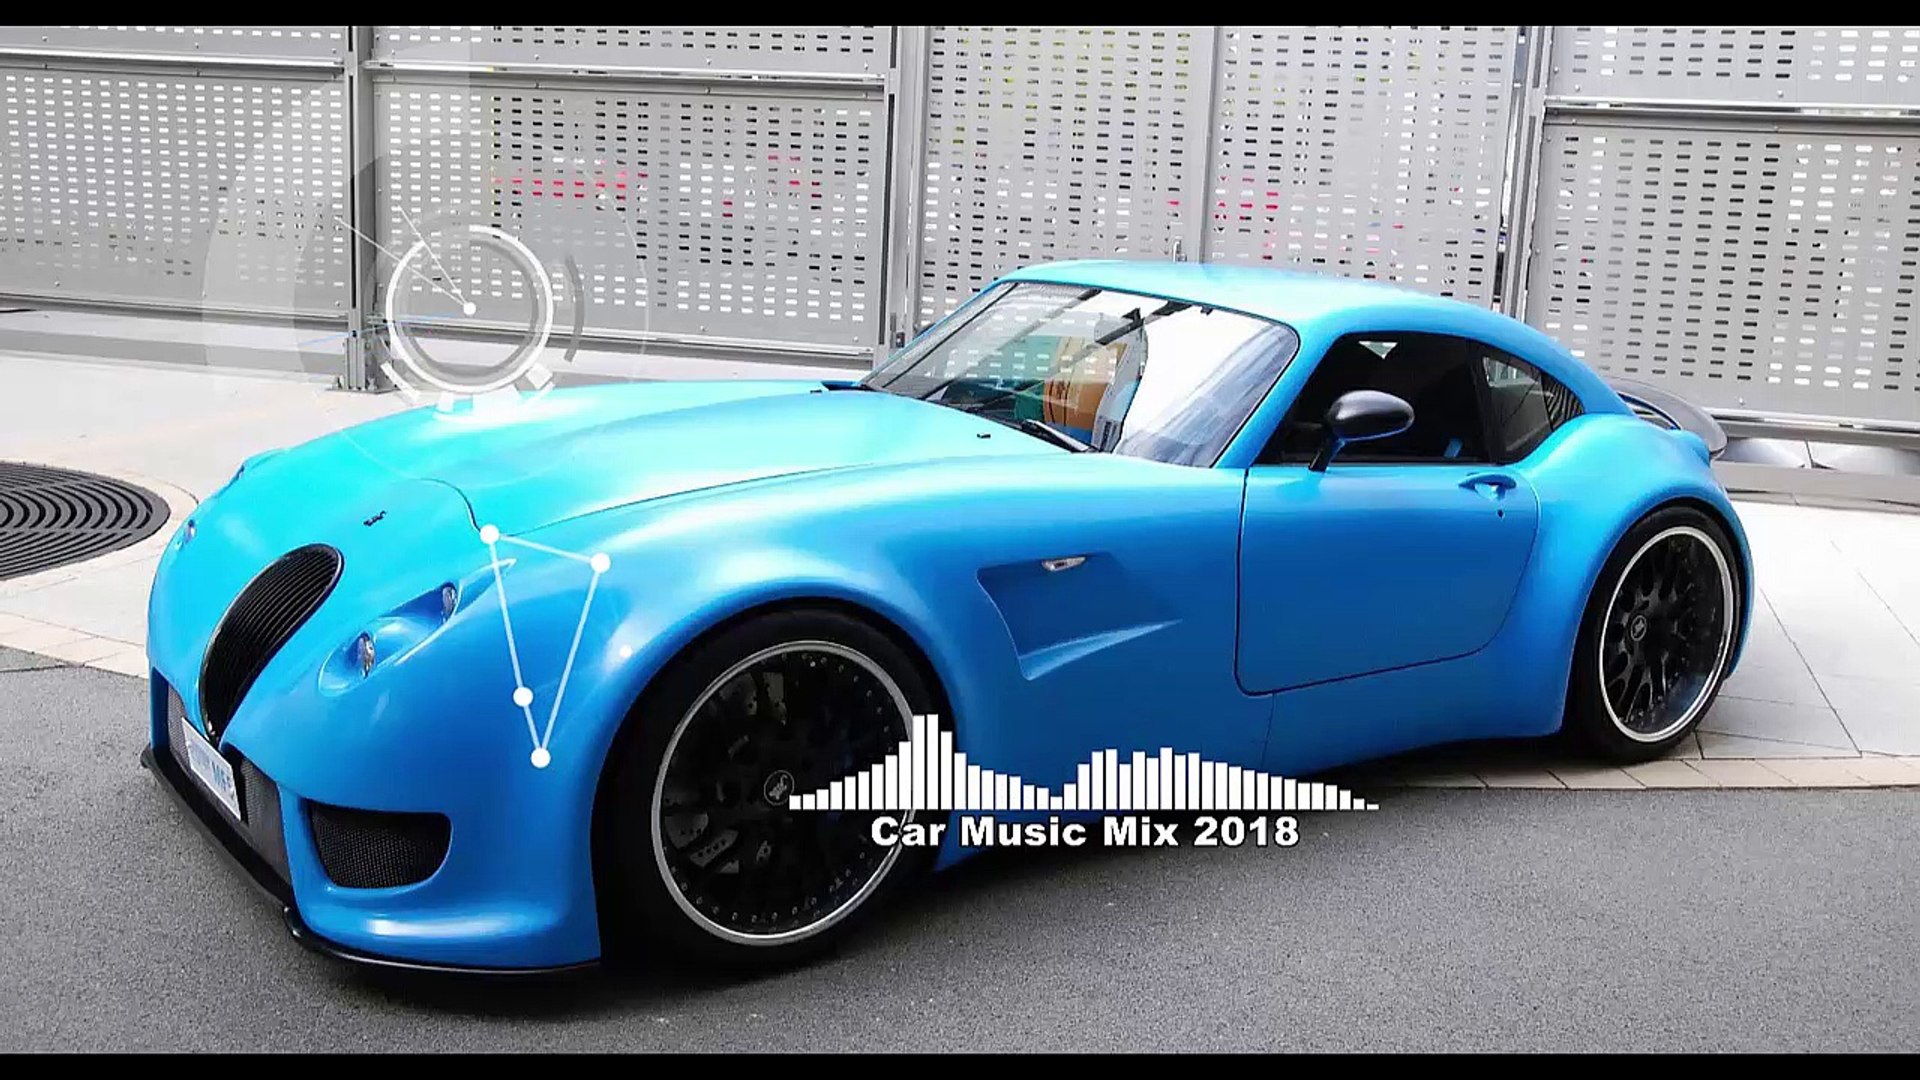 Car Music Mix 2018 New Electro House Boosted Songs Best Remixes of Popular Songs - Video Dailymotion